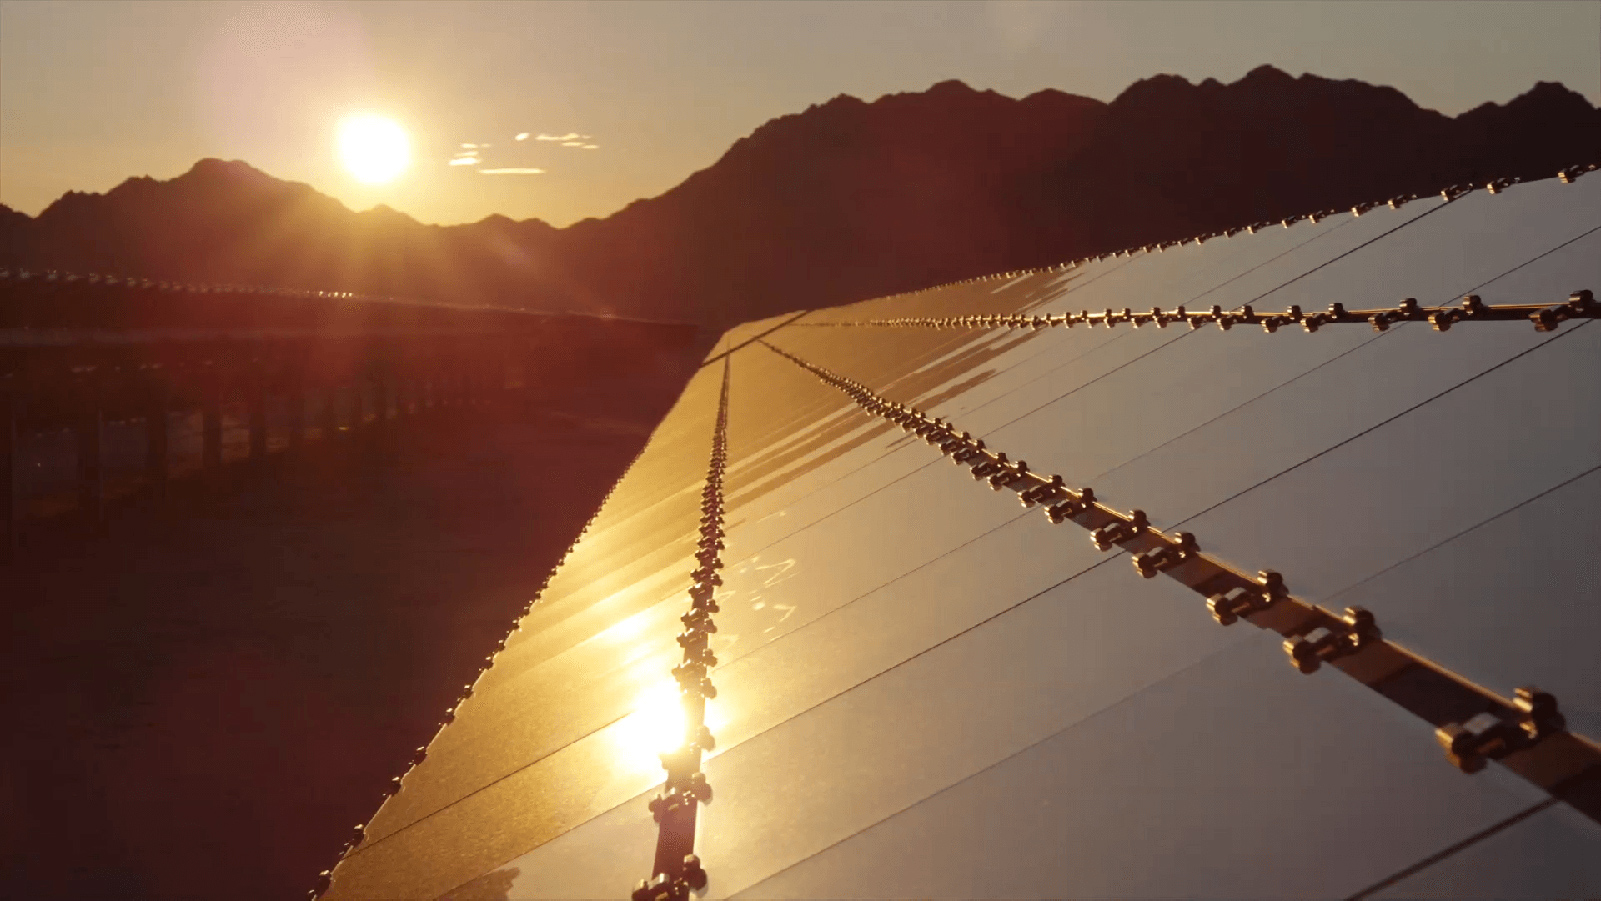 Paloma Solar Plant with a mountainscape and setting sun.